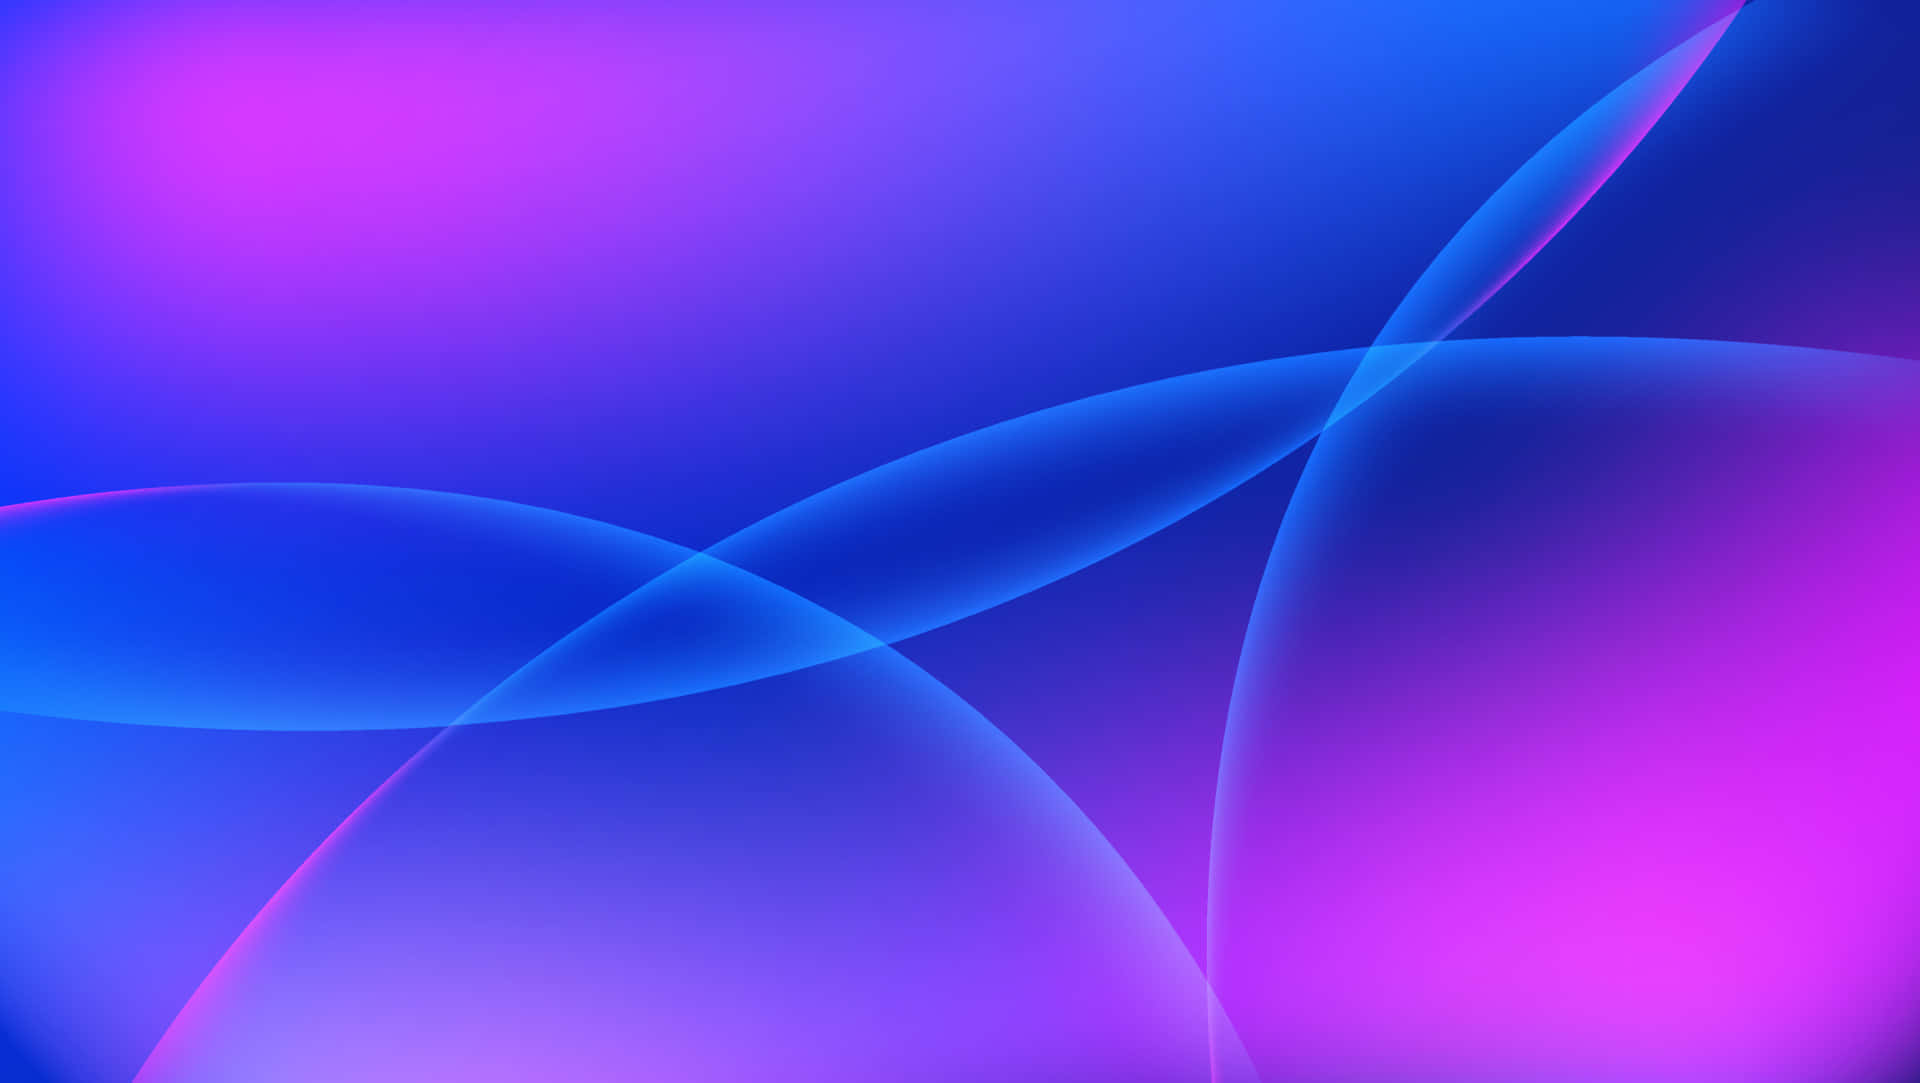 Pink And Blue Intertwined Circles Abstract Gradient Background